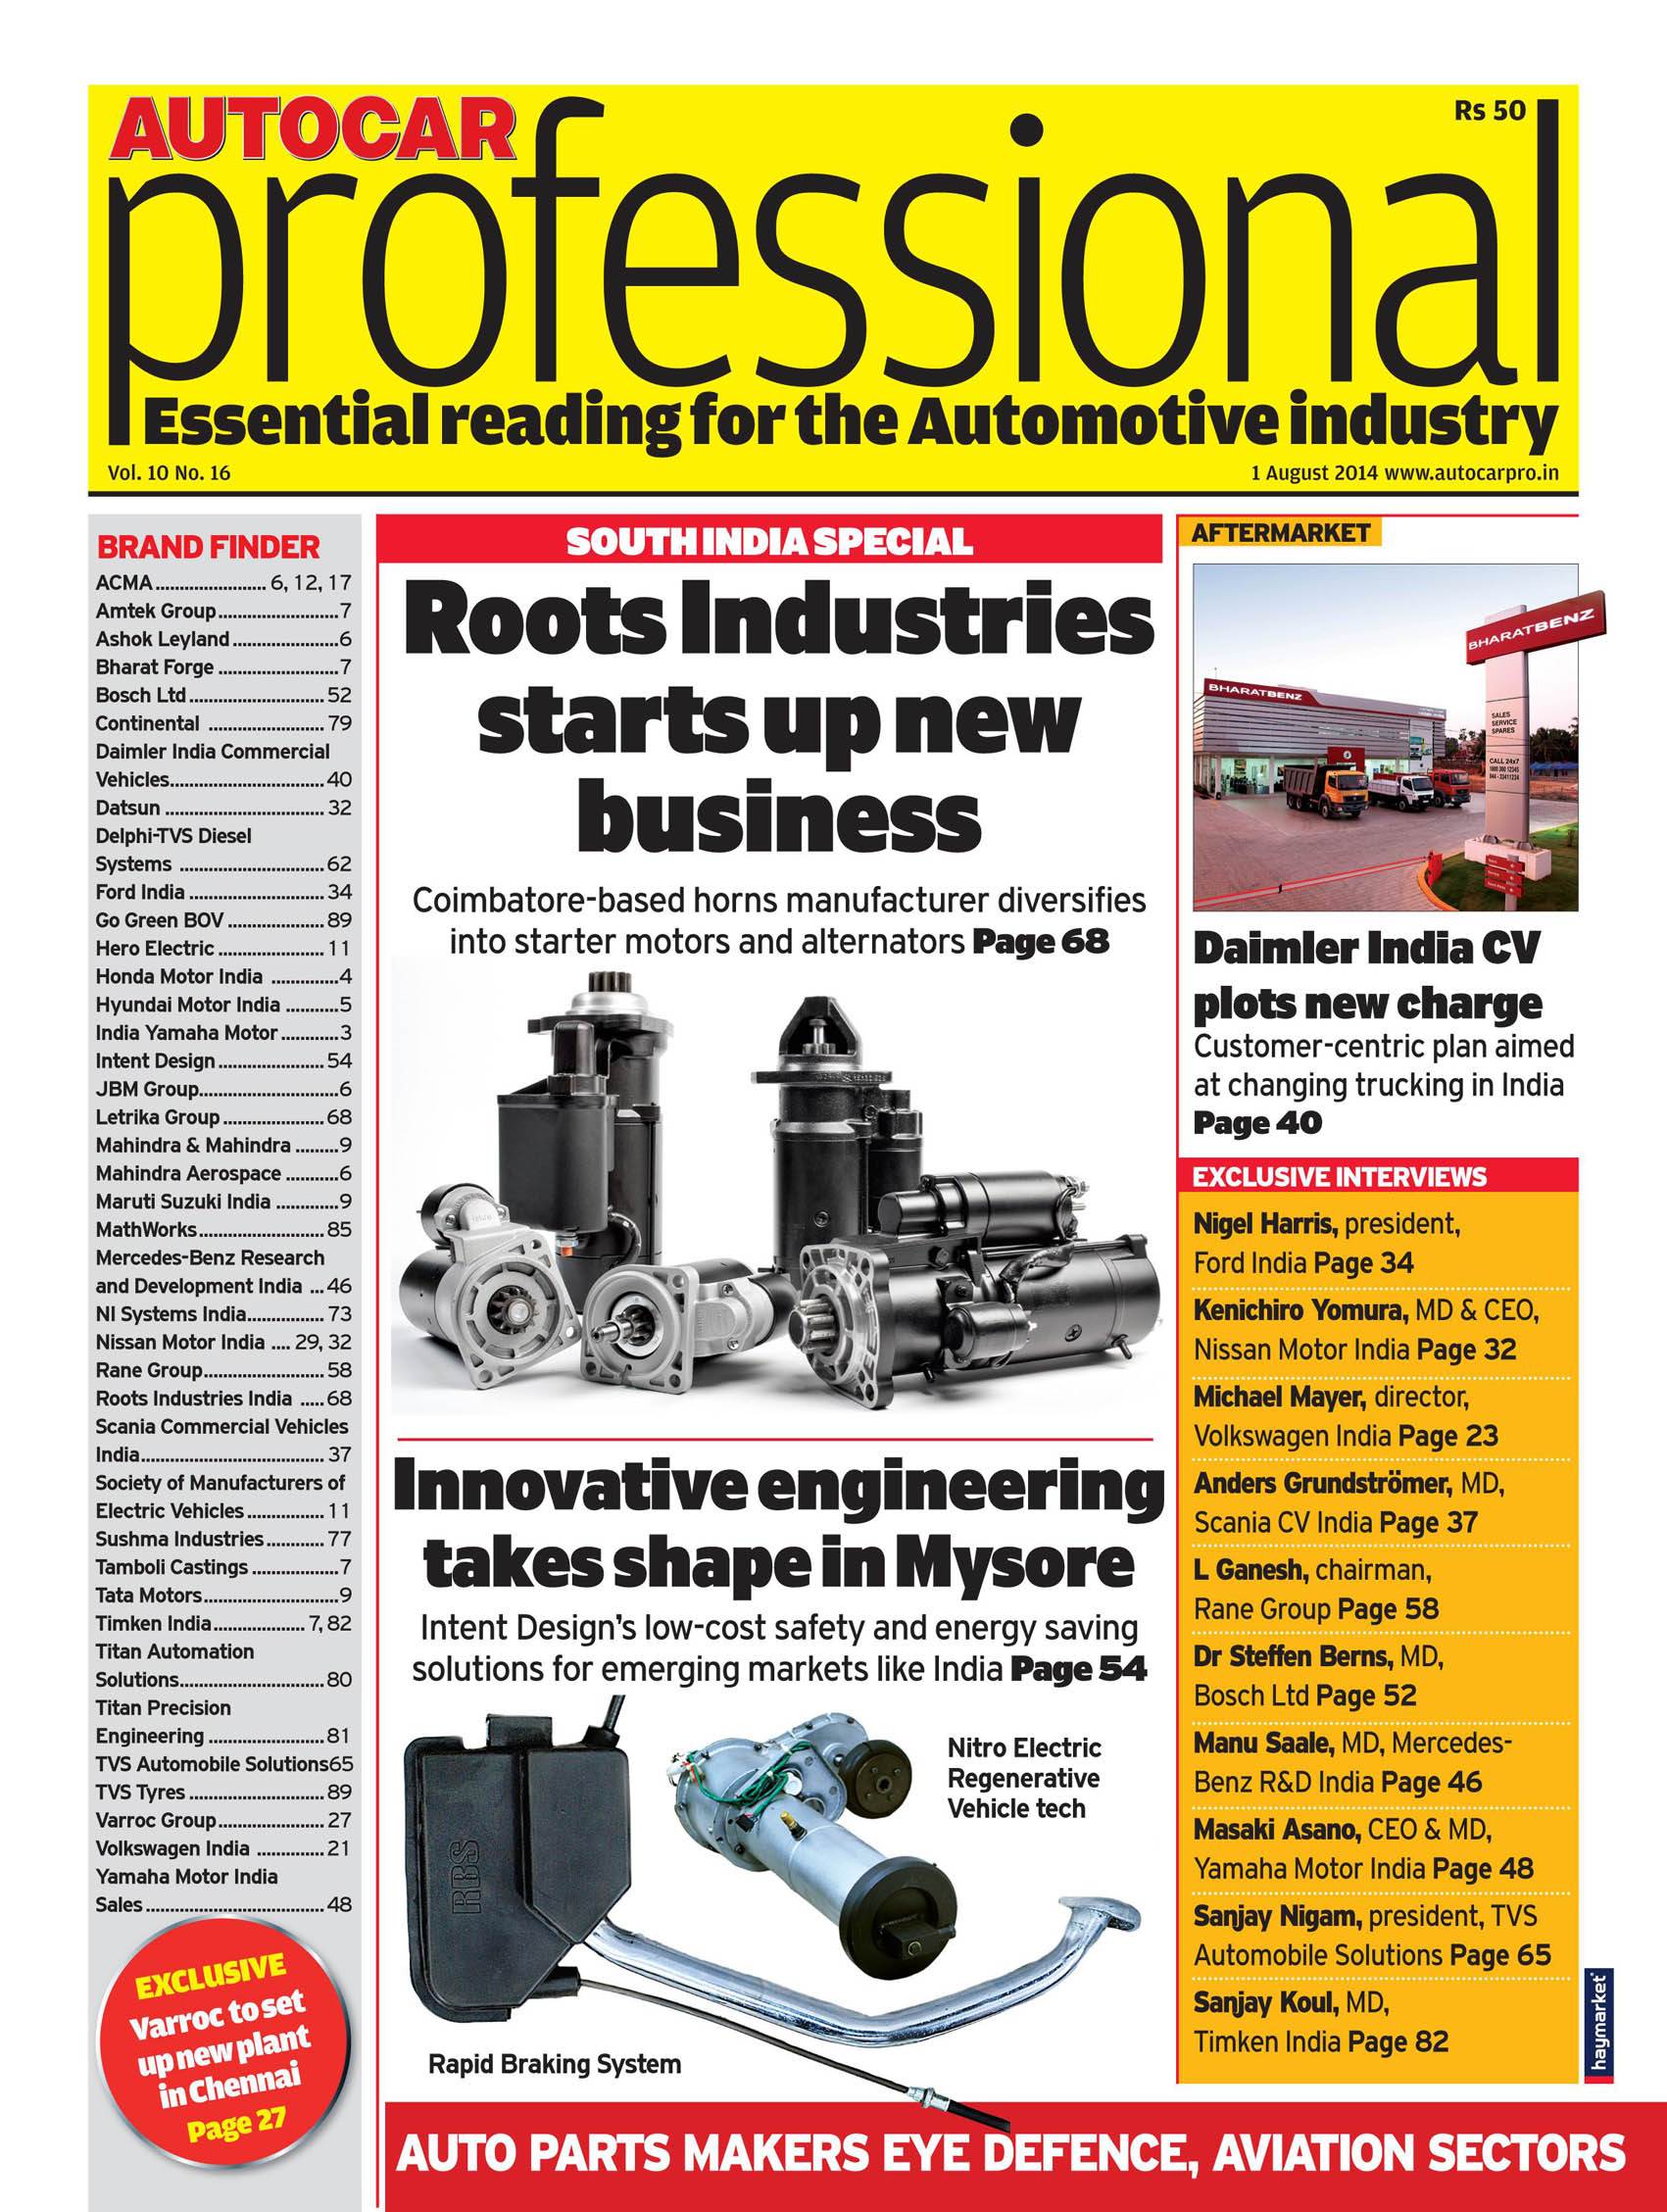 autocar-professional-august-1-south-india-special-issue-preview